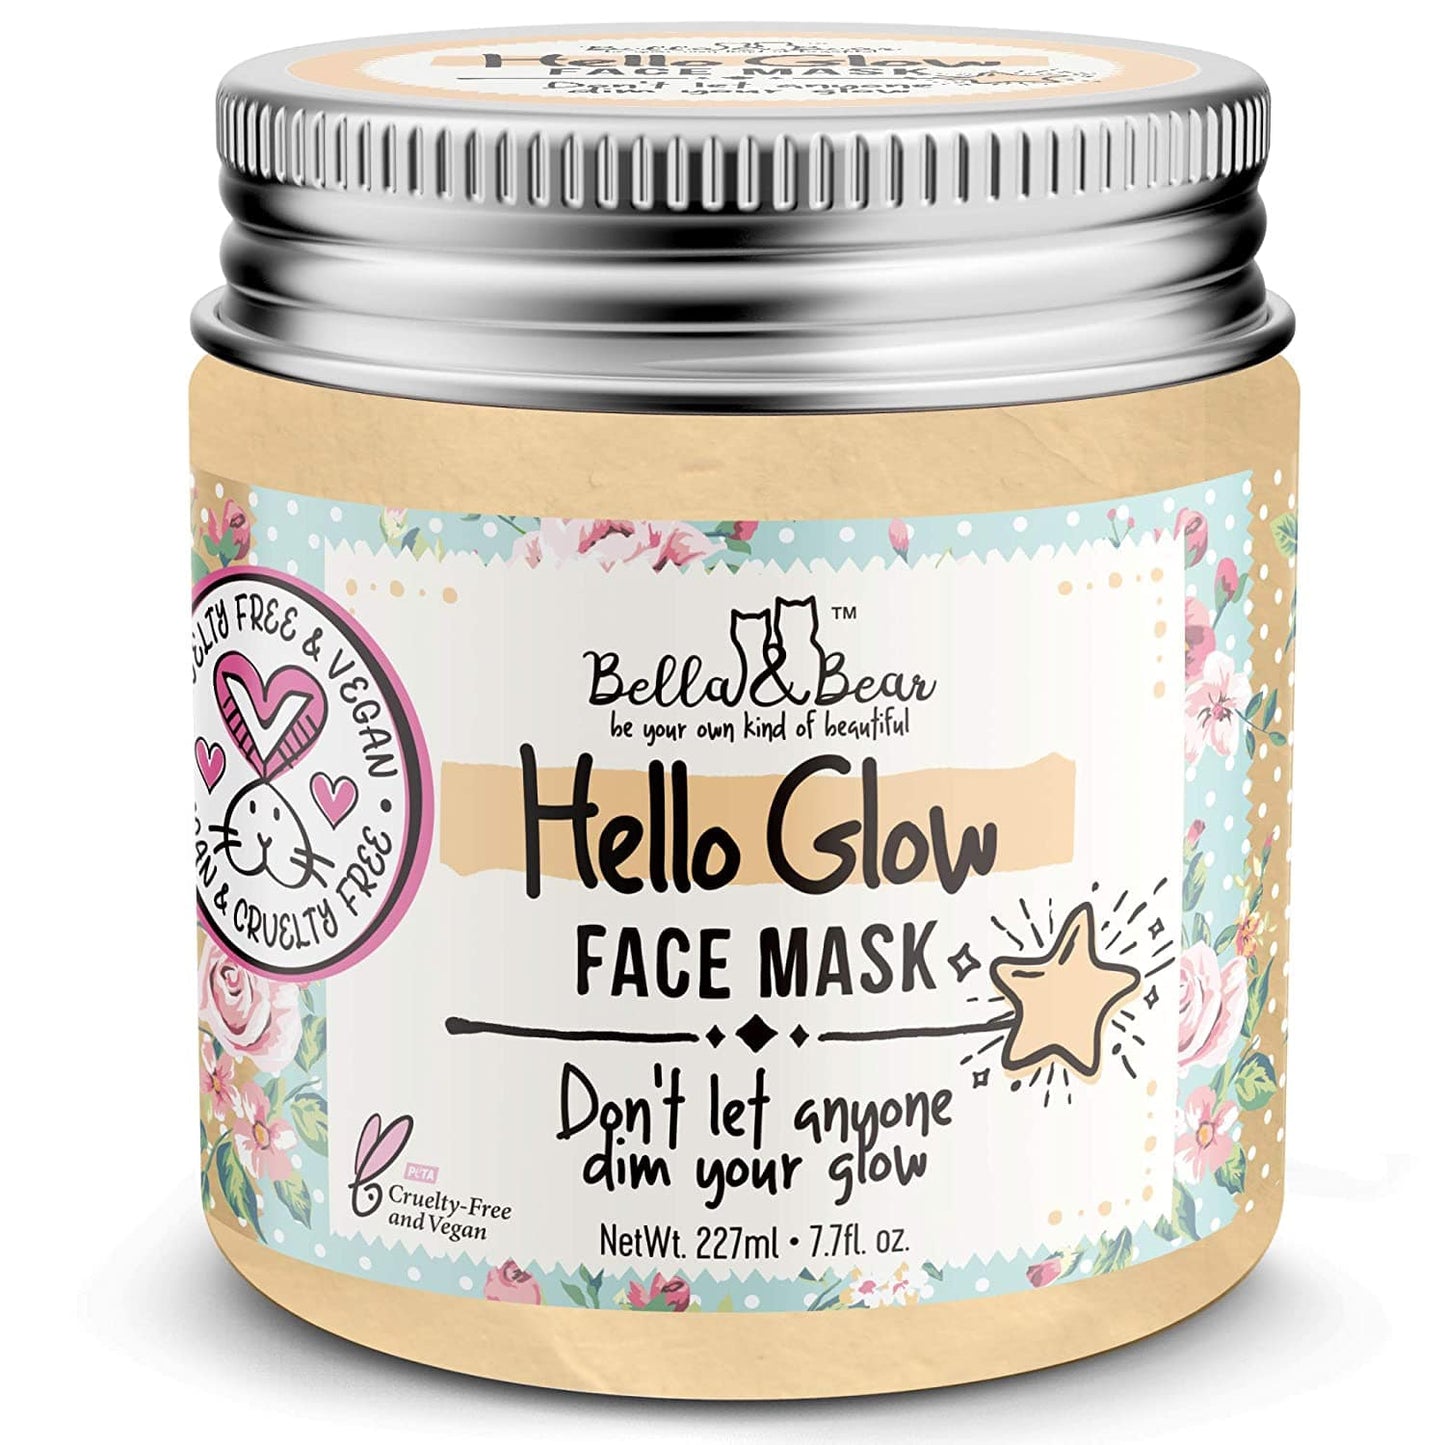 Hello Glow Face Mask for brightening & smoothing 6.7oz